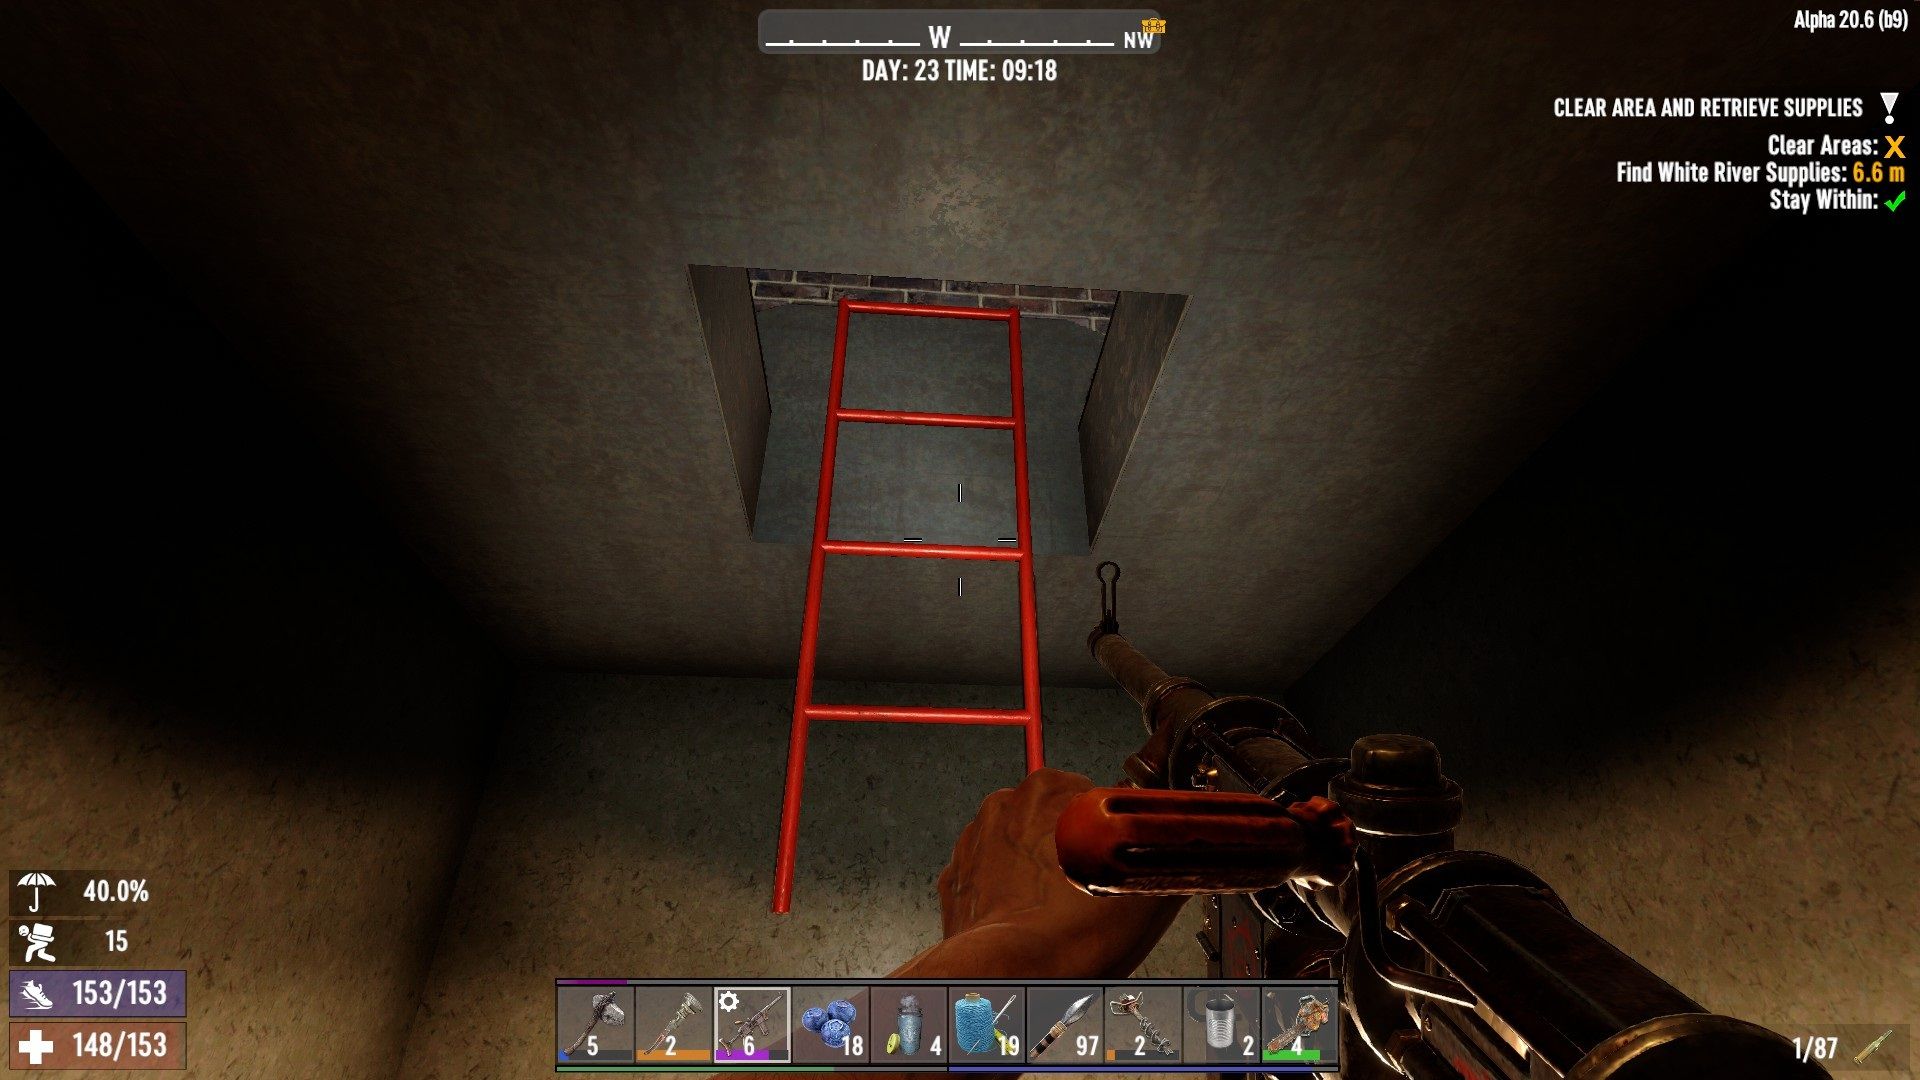 red ladder found I used to get to next floor Apartment Building 249 7 Days To Die.jpg